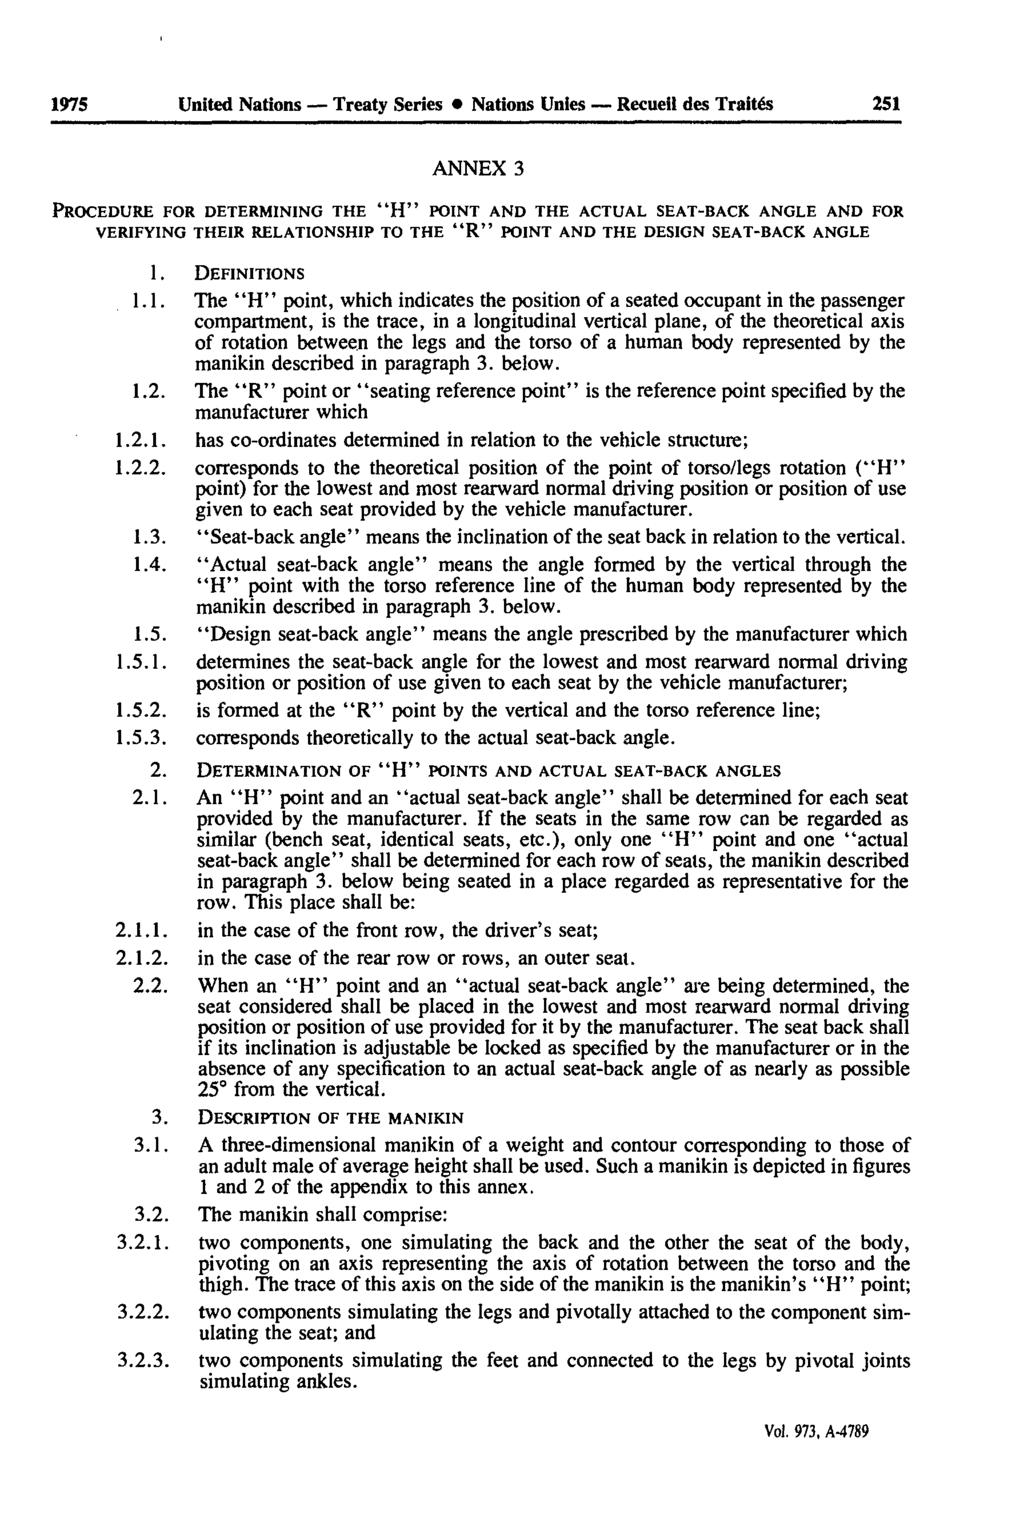 1975 United Nations Treaty Series Nations Unies Recueil des Traités 251 ANNEX 3 PROCEDURE FOR DETERMINING THE "H" POINT AND THE ACTUAL SEAT-BACK ANGLE AND FOR VERIFYING THEIR RELATIONSHIP TO THE "R"